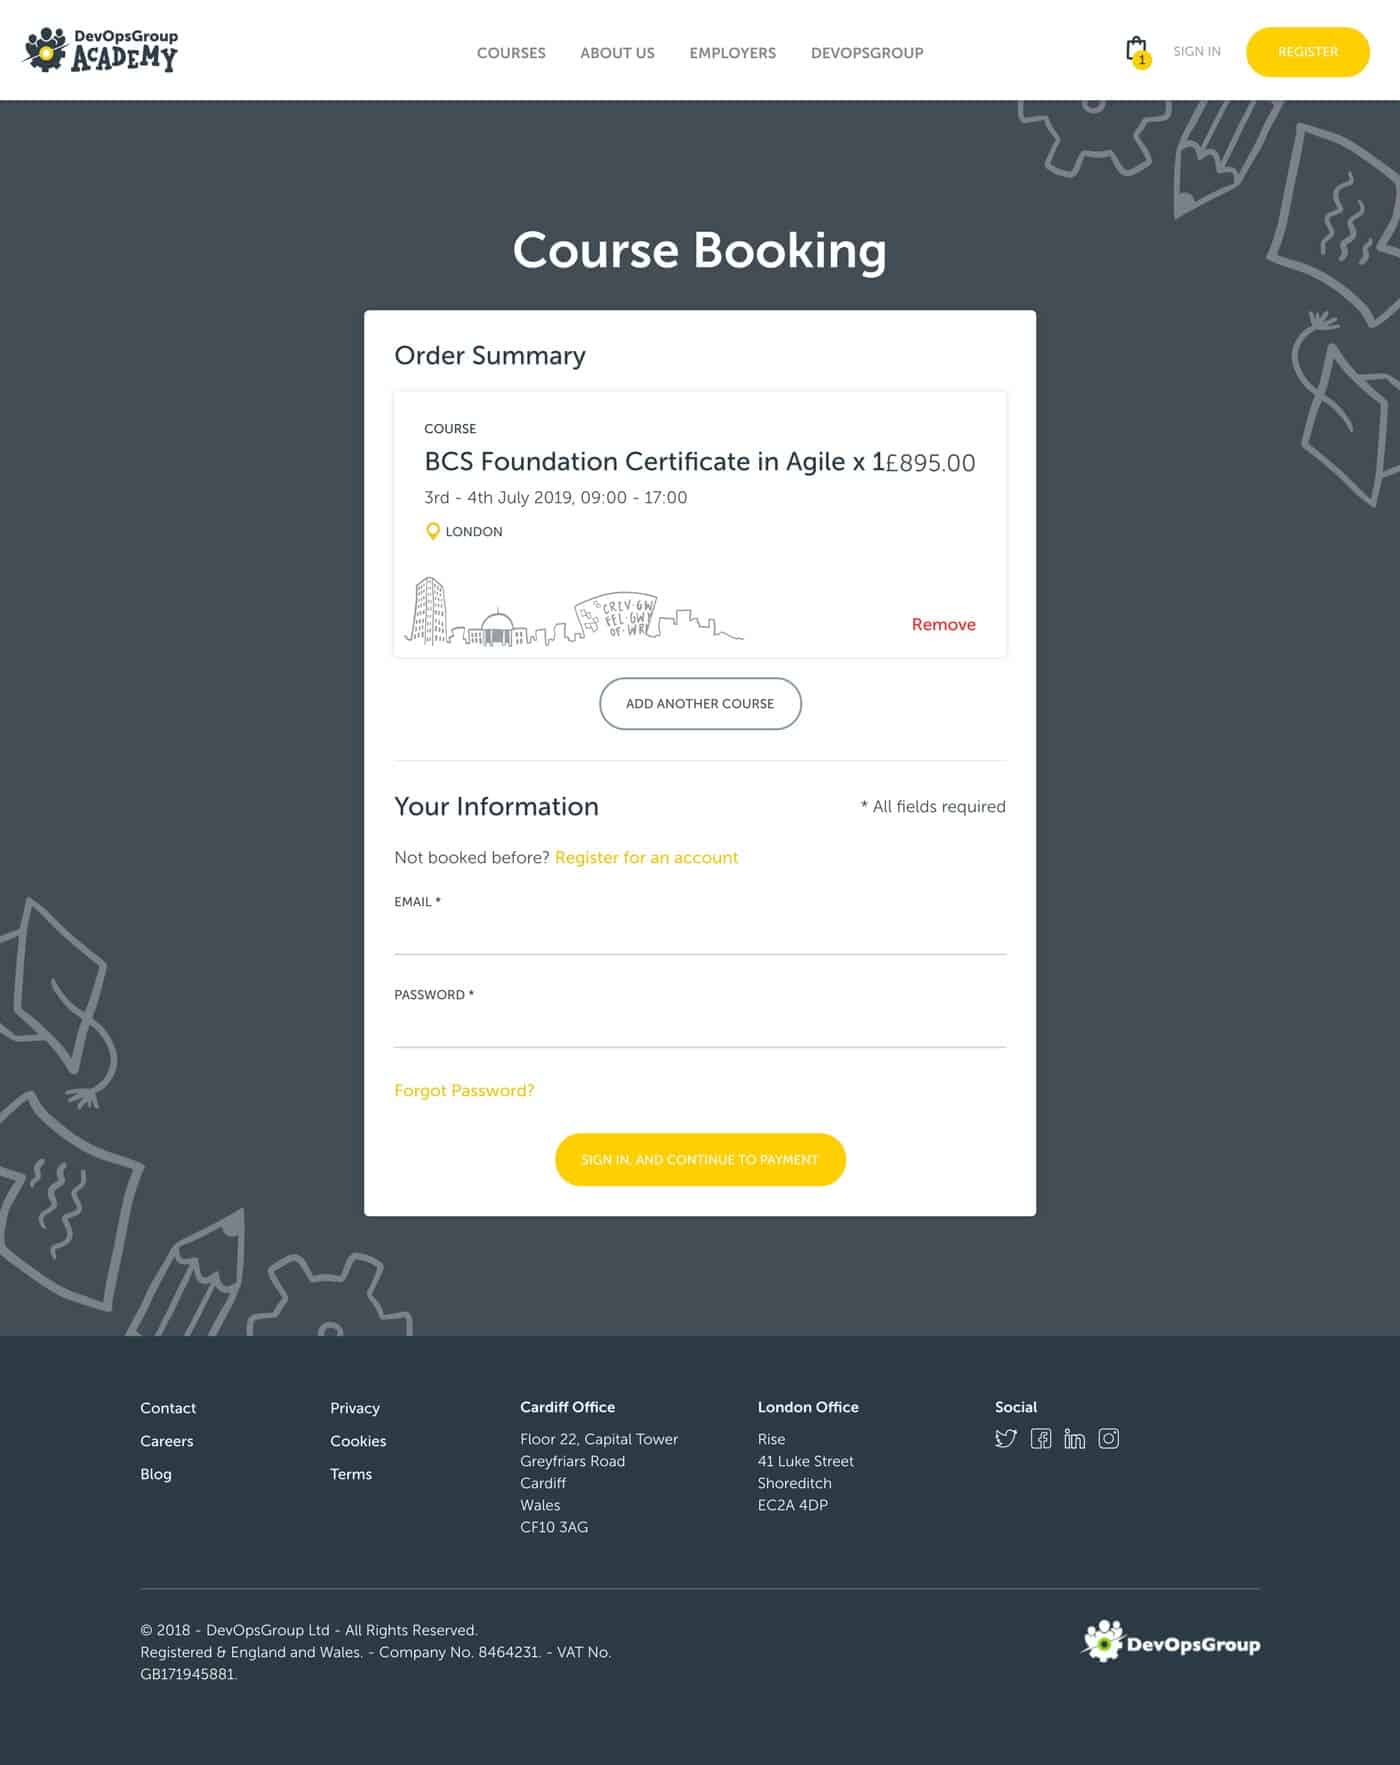 Bespoke Course Booking, Checkout Page on DevOpsGroup Academy Website